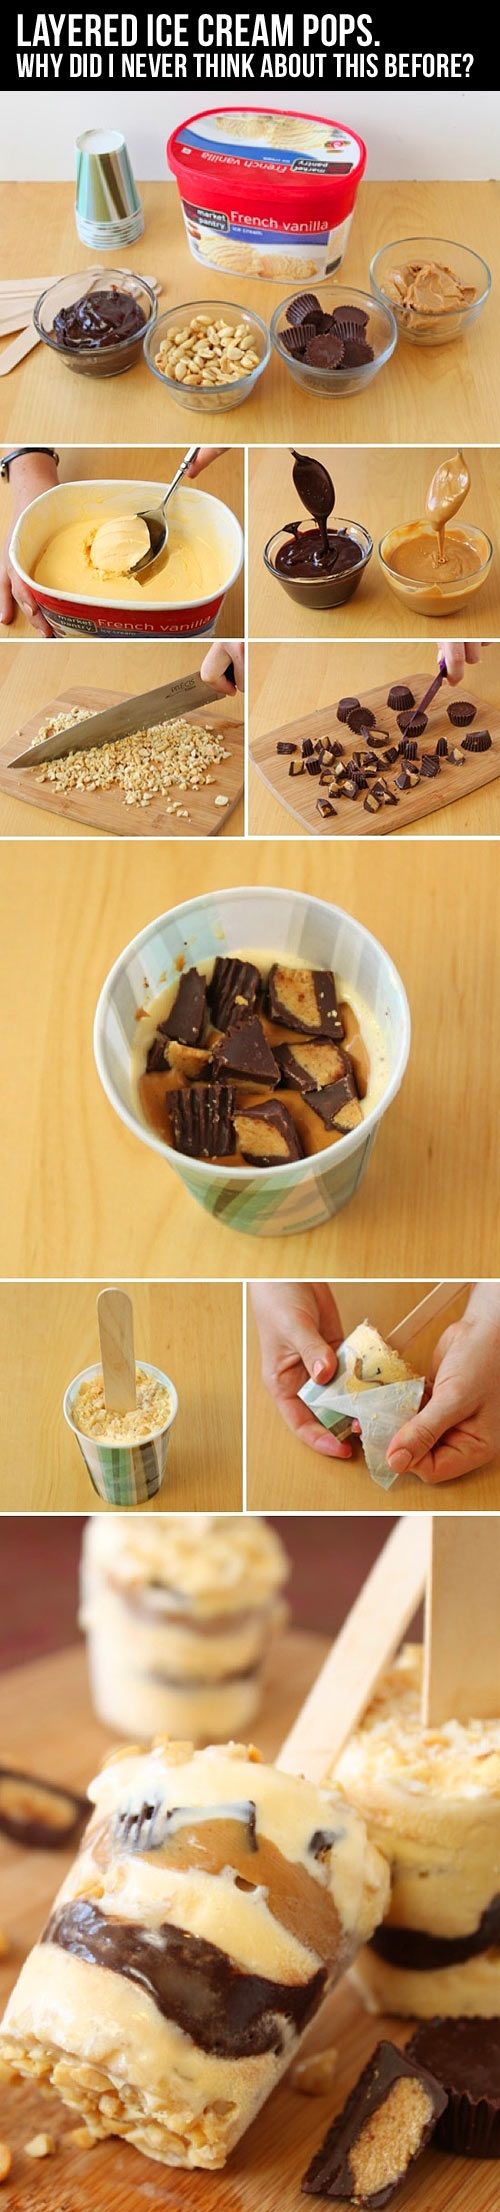 Layered Ice Cream Pops. Yum! I'm going to have to try this.